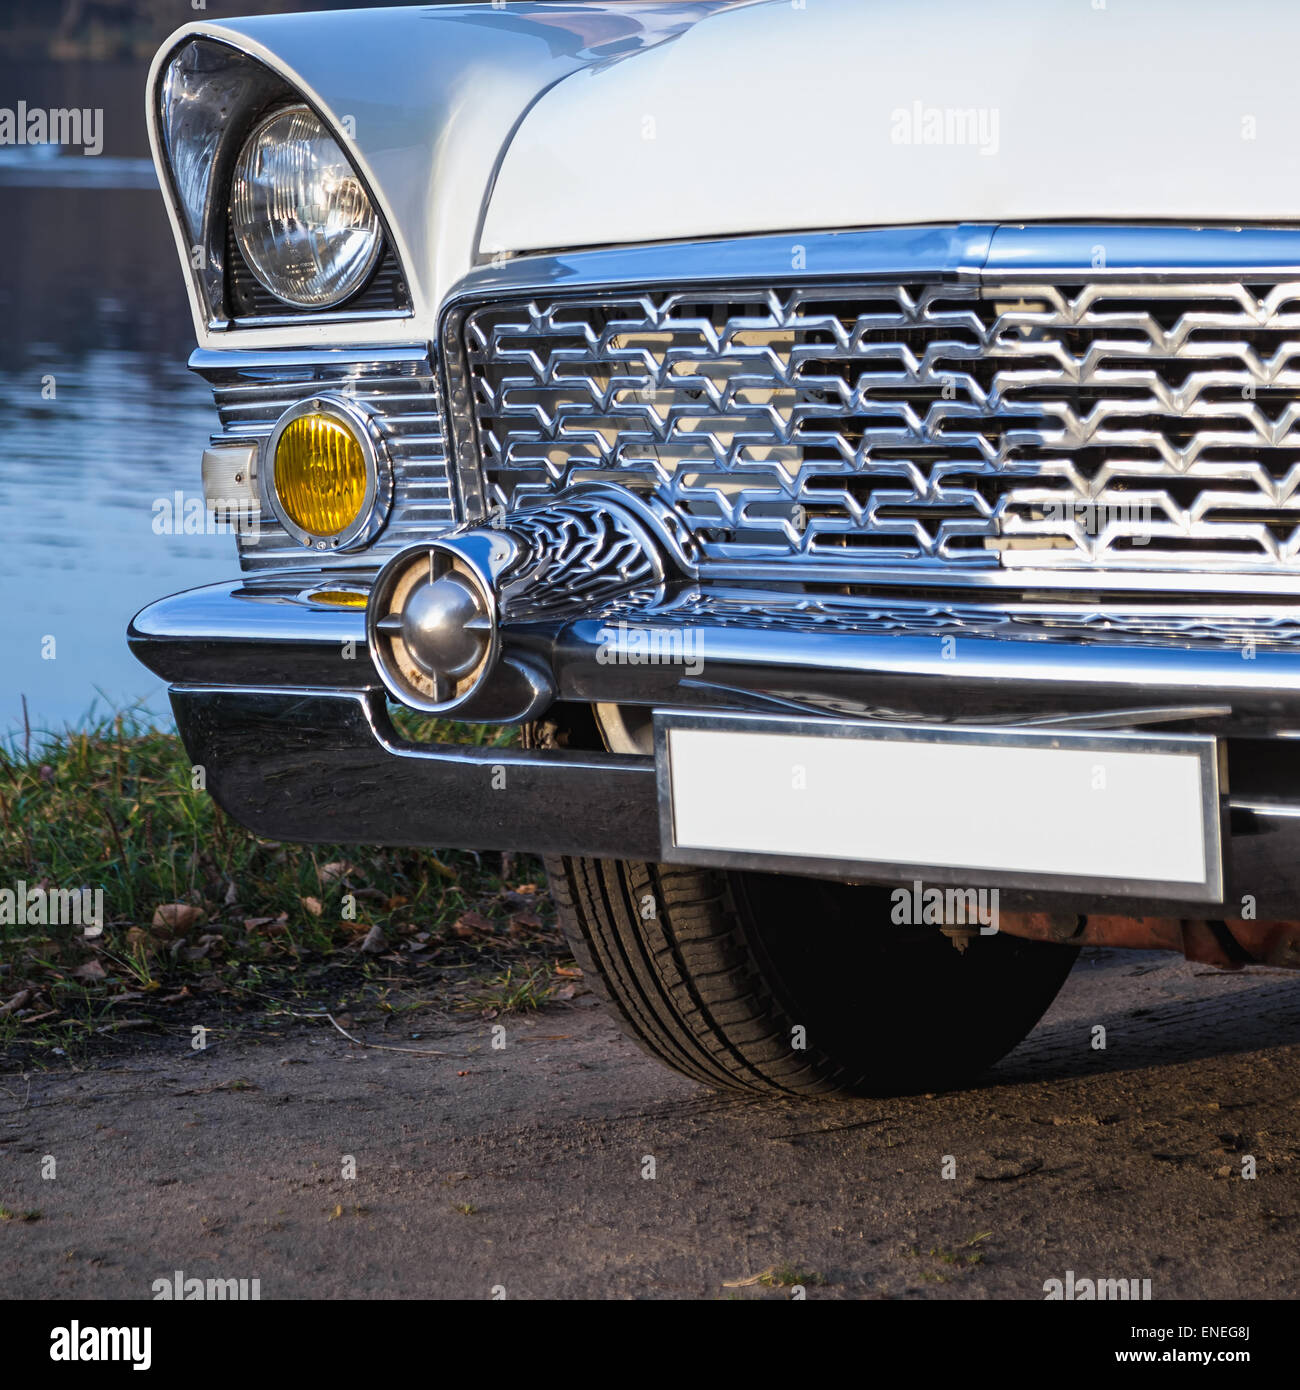 61,699 Car Grill Royalty-Free Photos and Stock Images